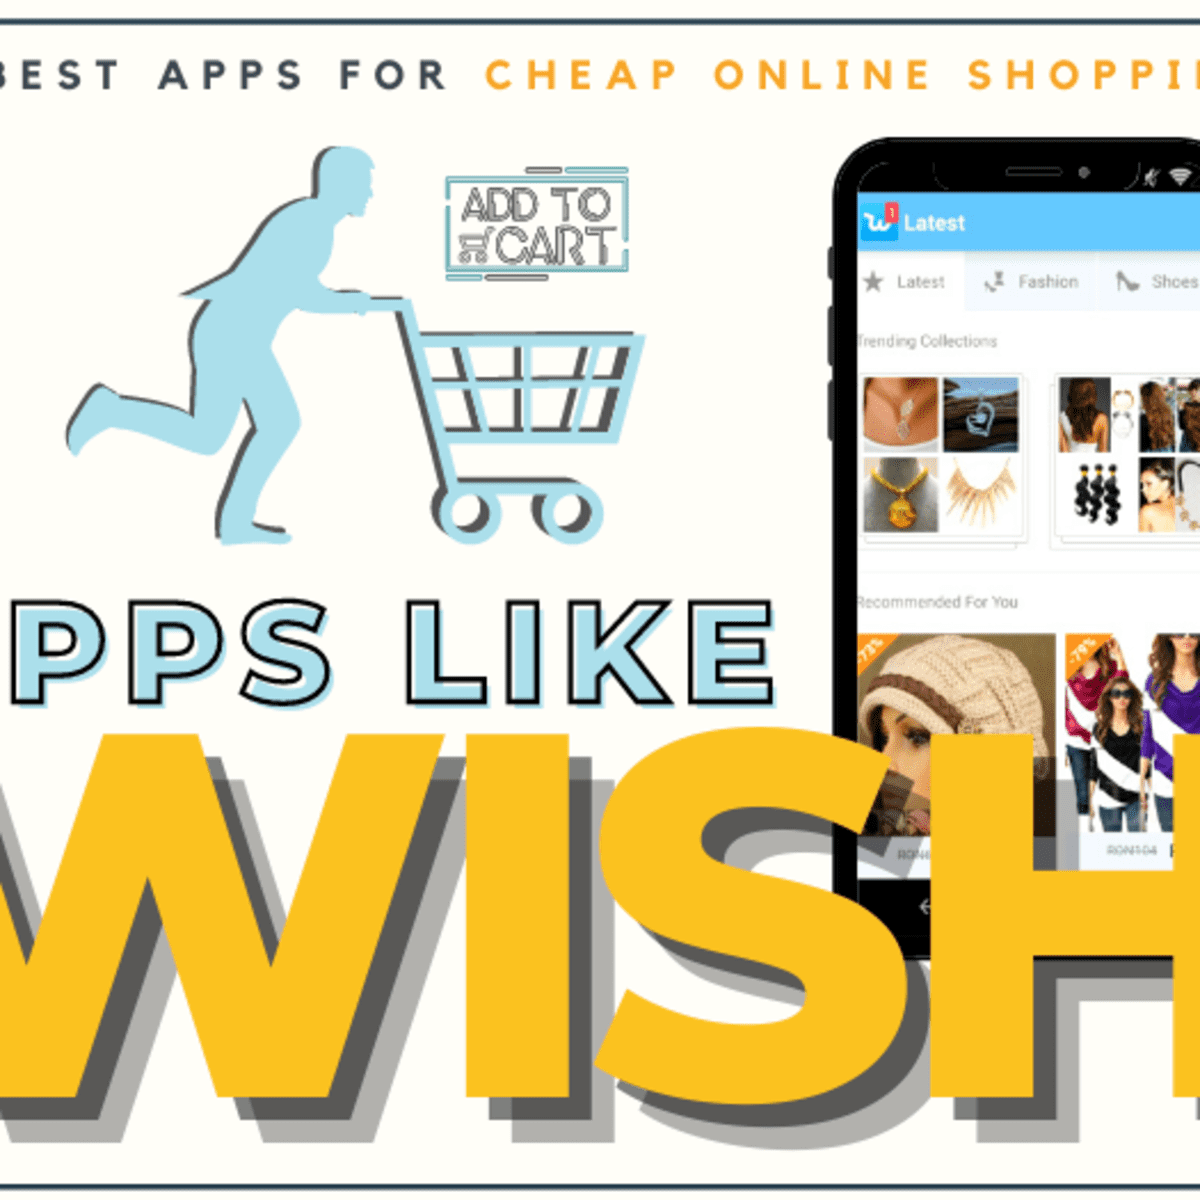 Absoluut Mysterieus Harmonie 10 Apps Like Wish: Shop at the Cheapest Online Stores - TurboFuture